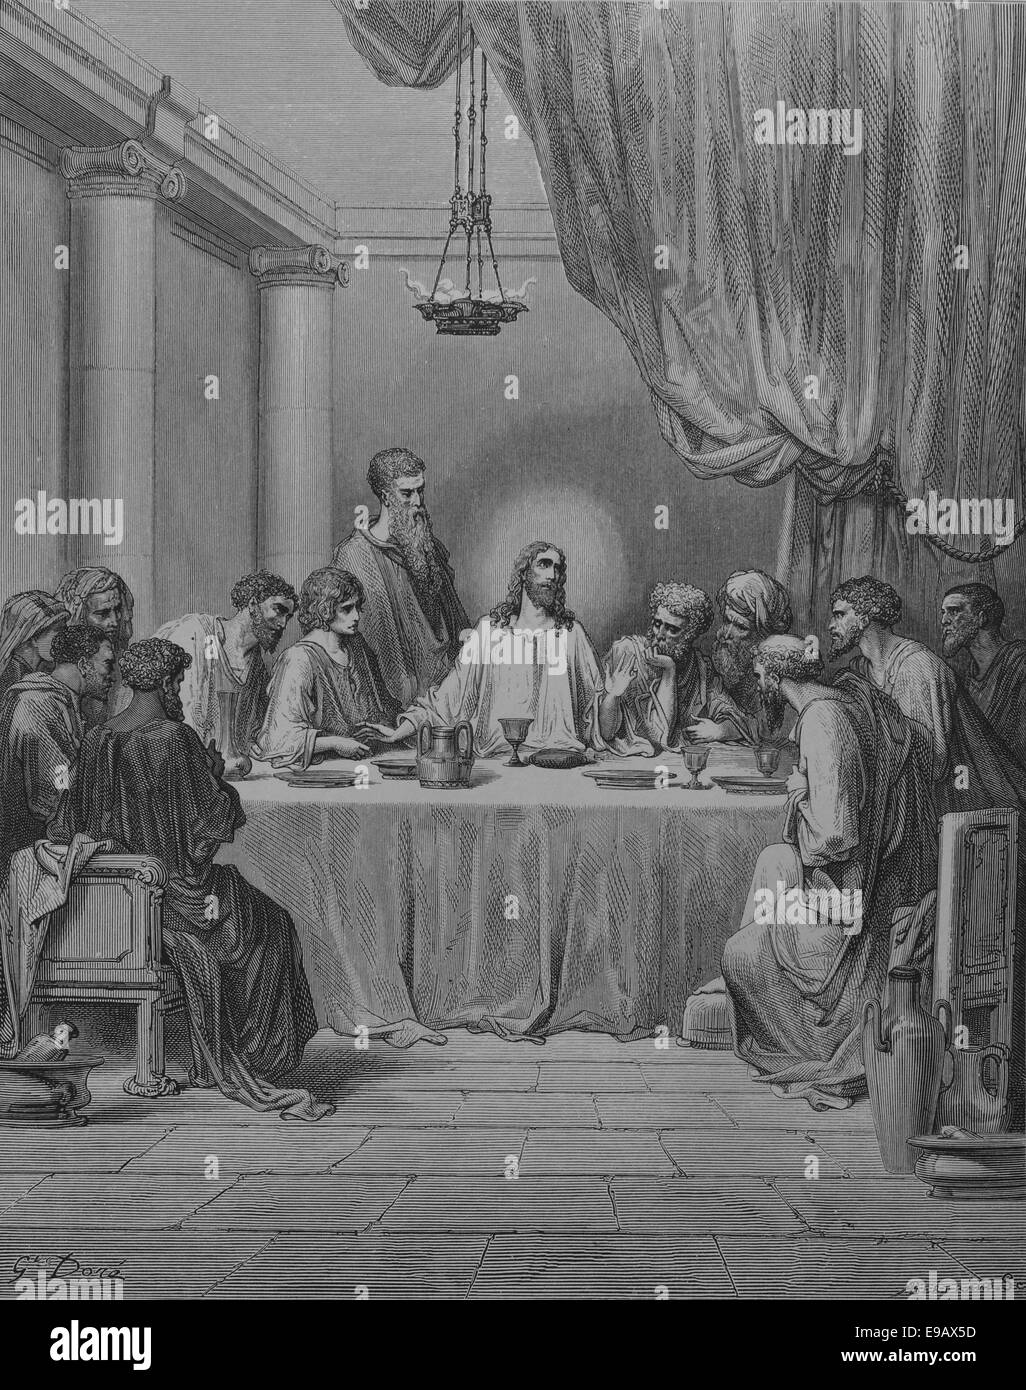 Illustrated Bible. New Testament. The Last Supper. John 13:31. Drawing by Gustave Dore (1832-1883) and engraving by Bertrand. Stock Photo